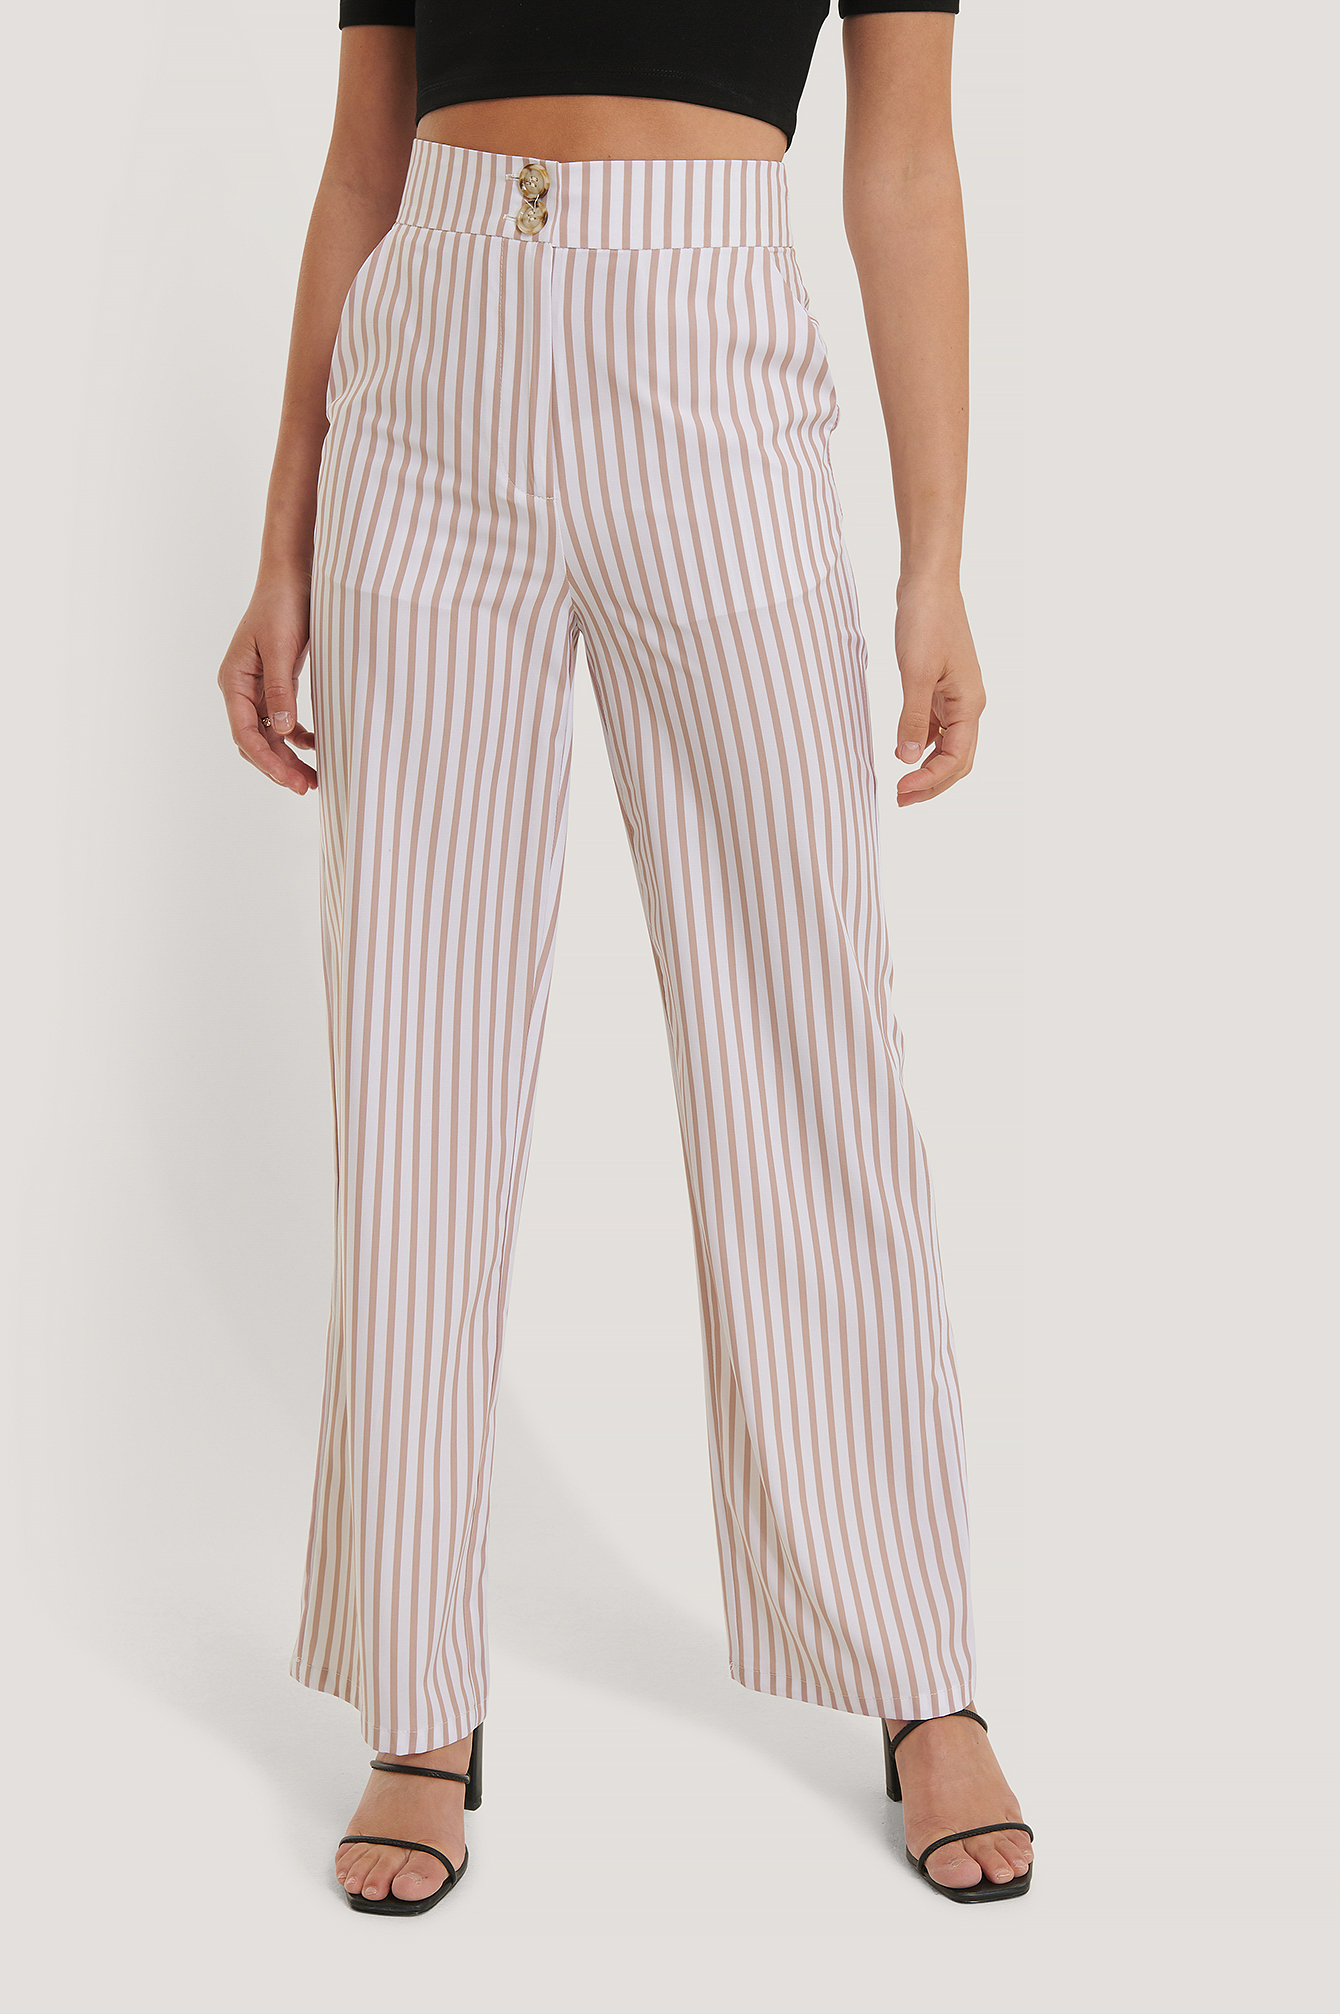 Striped trousers | Order pinstriped trousers from NA-KD | na-kd.com